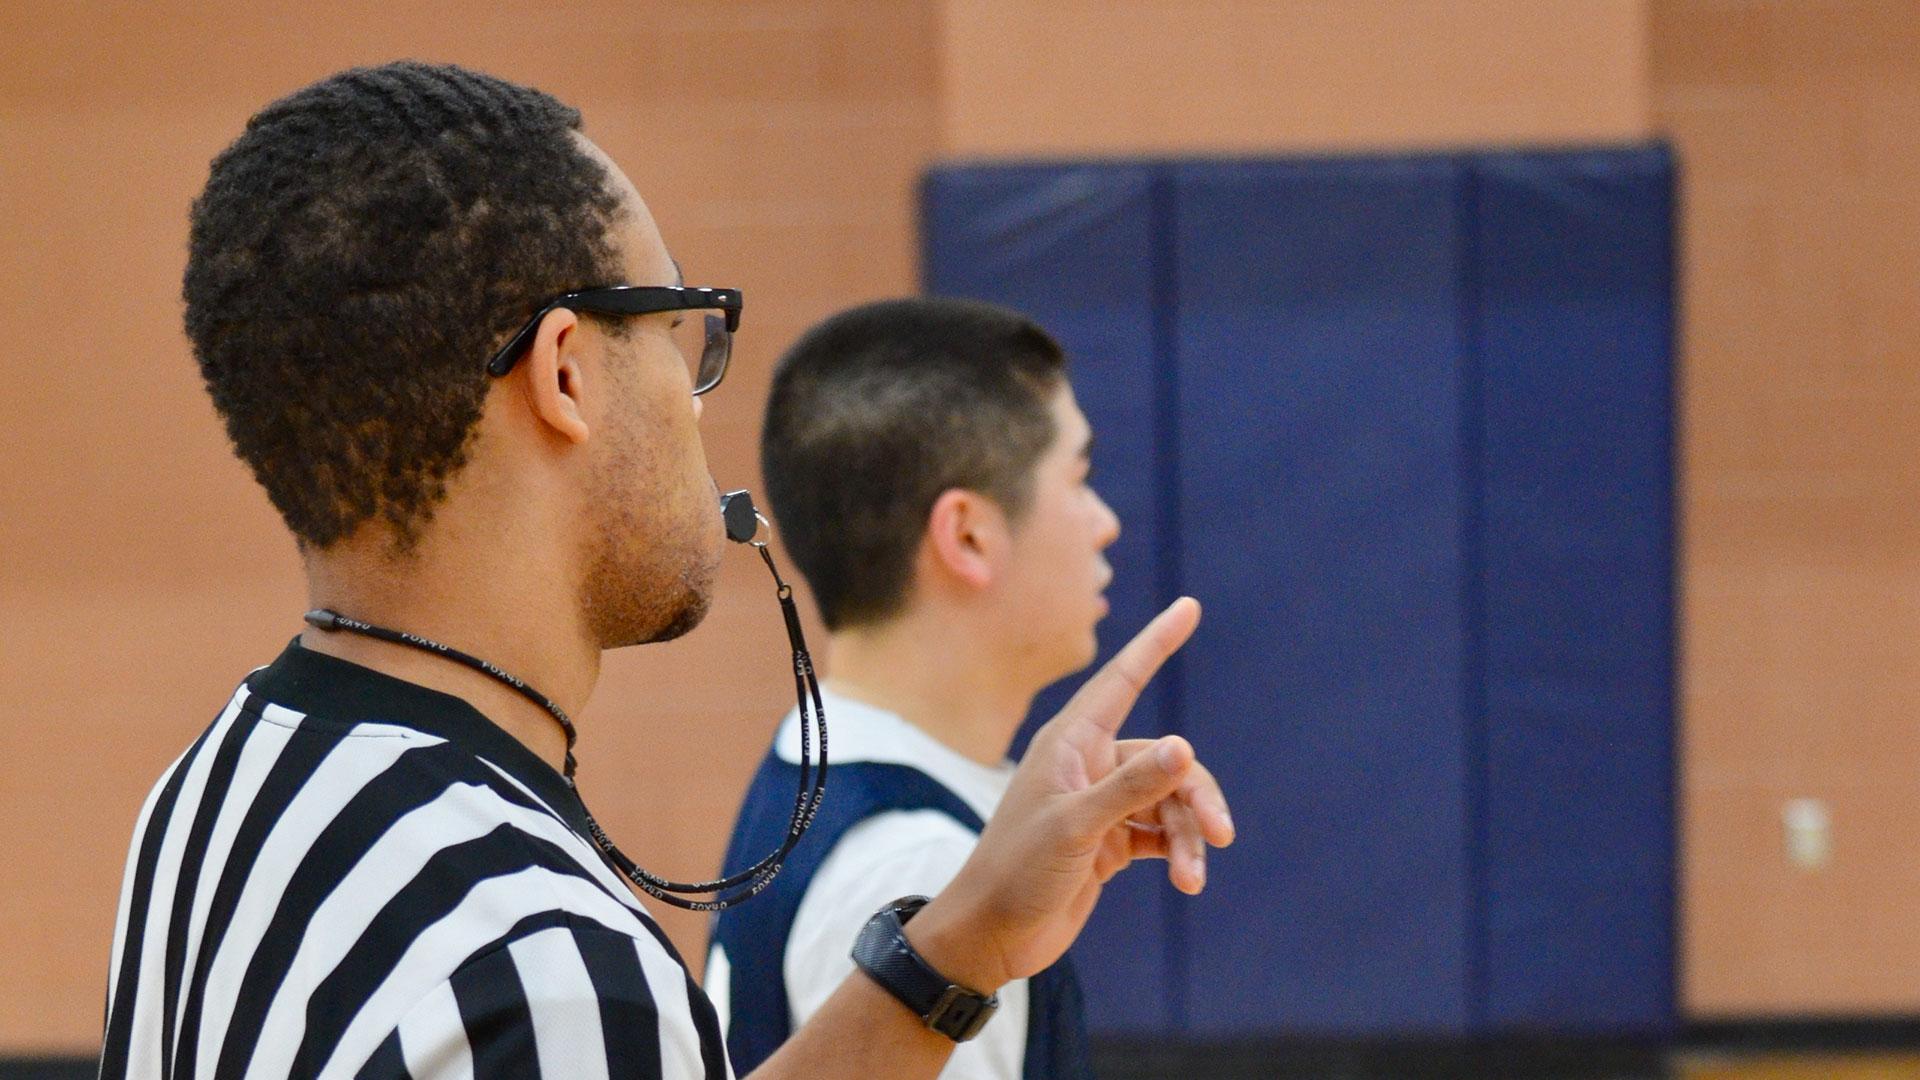 student staff referee at an intramural basketball game